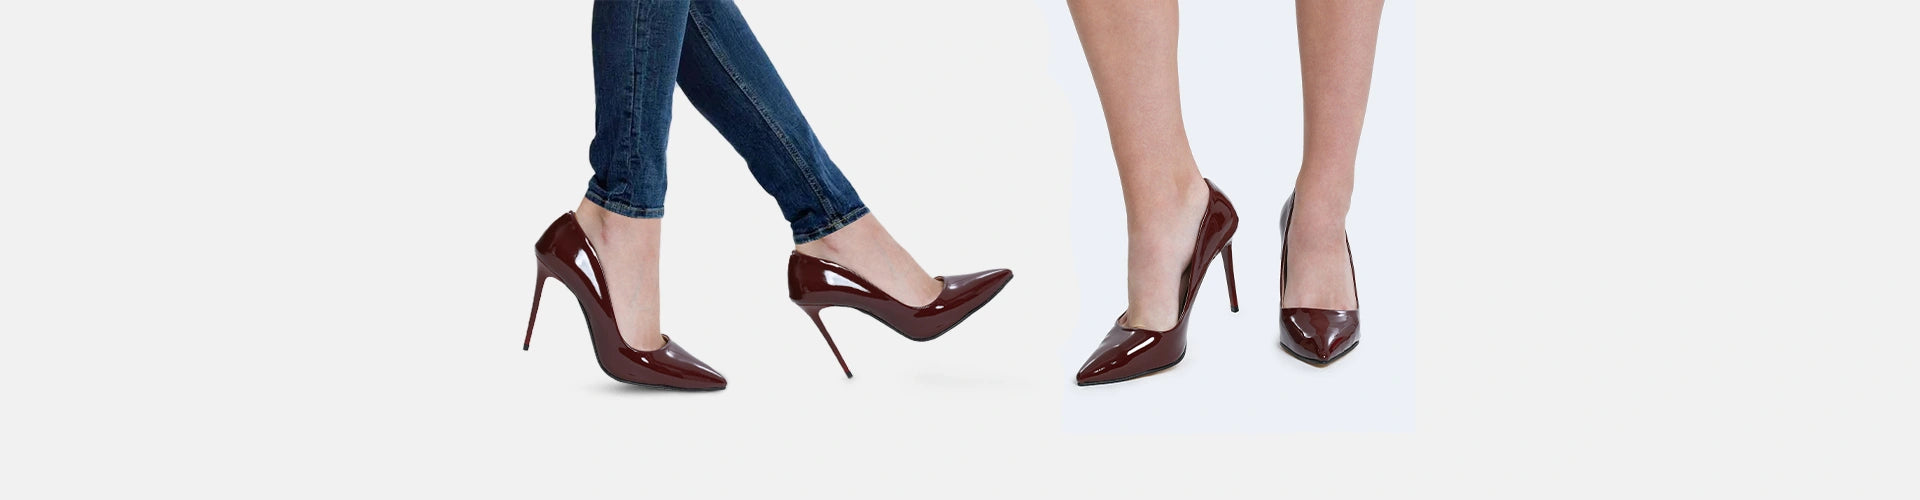 What Style of Heel is in Fashion?